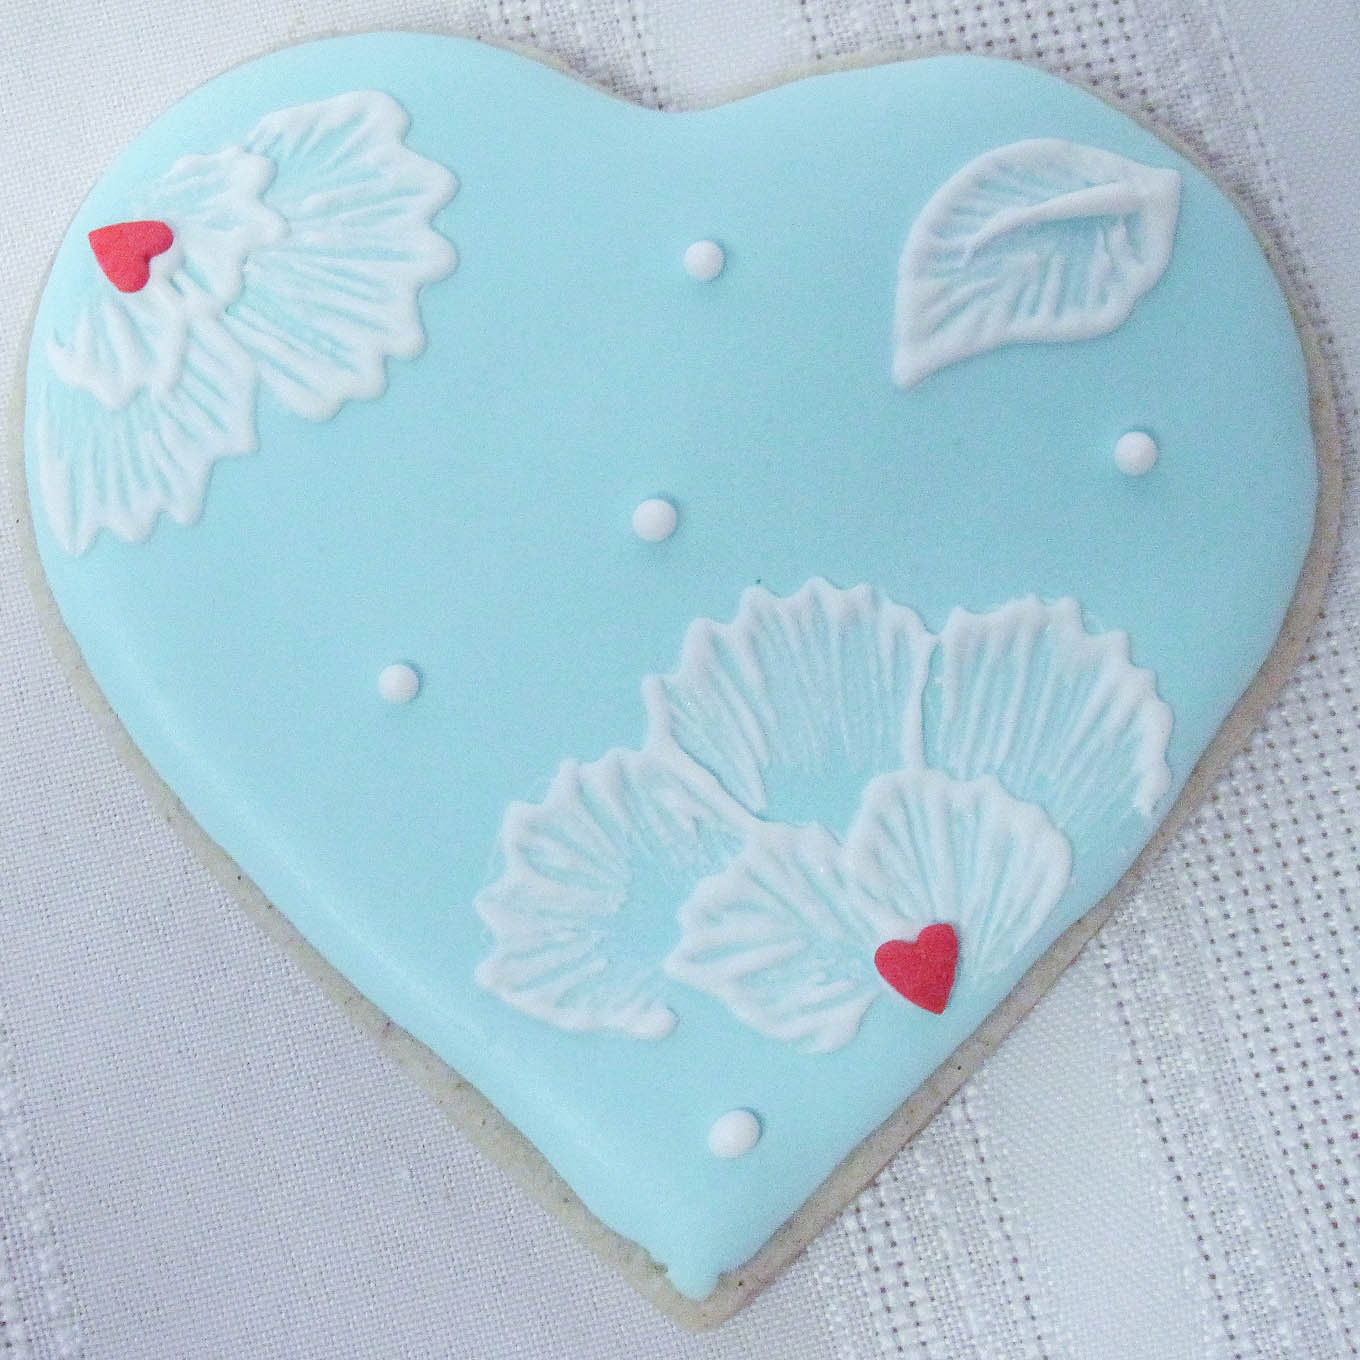 Heart shaped sugar cookie decorated with blue icing.